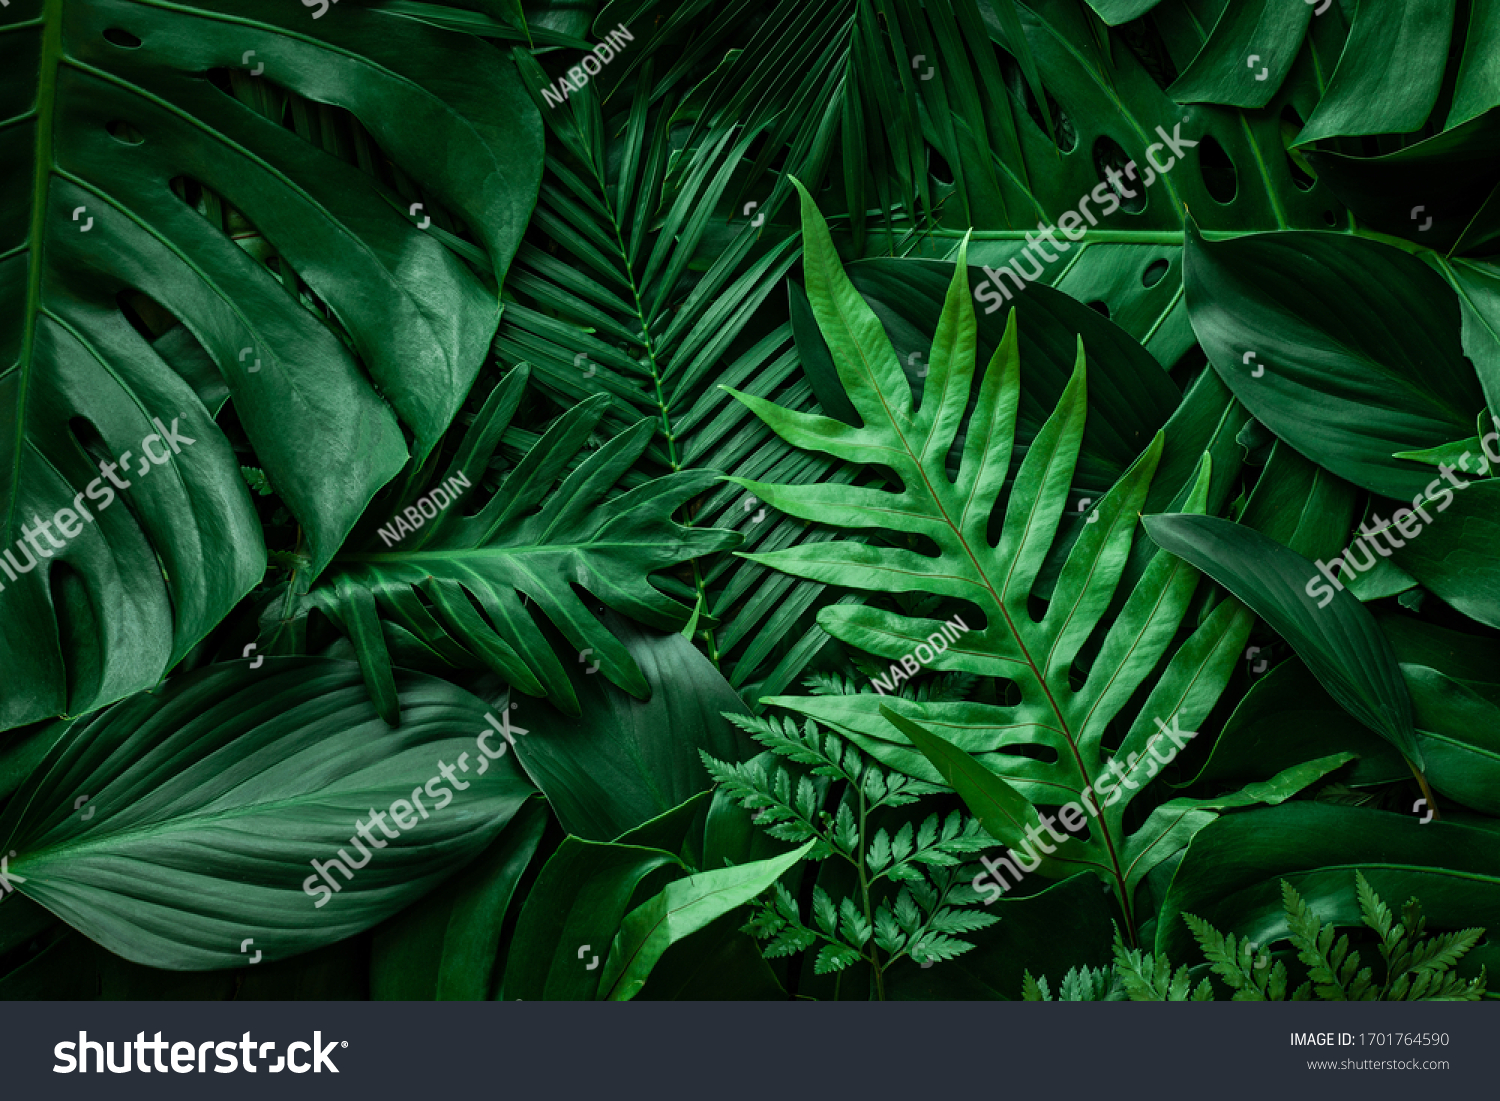 closeup nature view of green leaf and palms background. Flat lay, dark nature concept, tropical leaf #1701764590